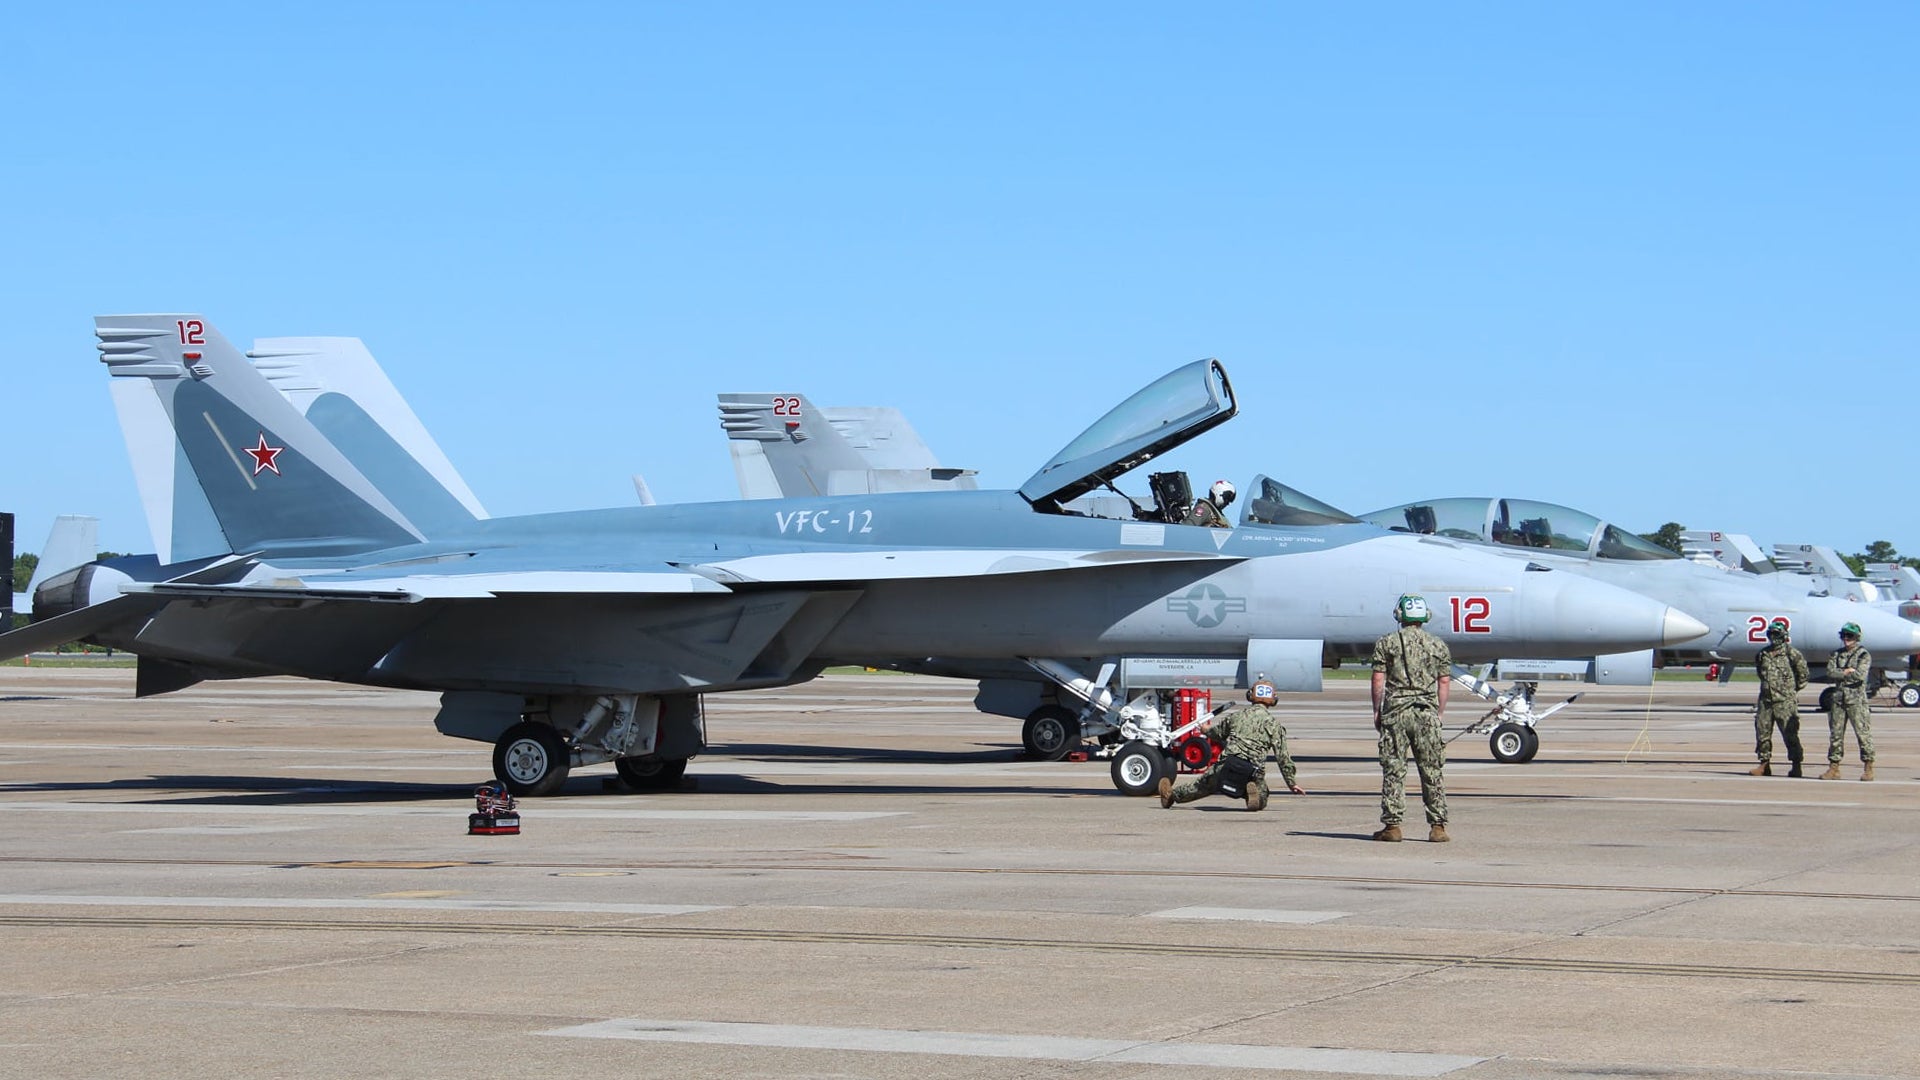 U.S. Navy Adversary Unit Reveals Super Hornet Masquerading As Russia’s Top Fighter